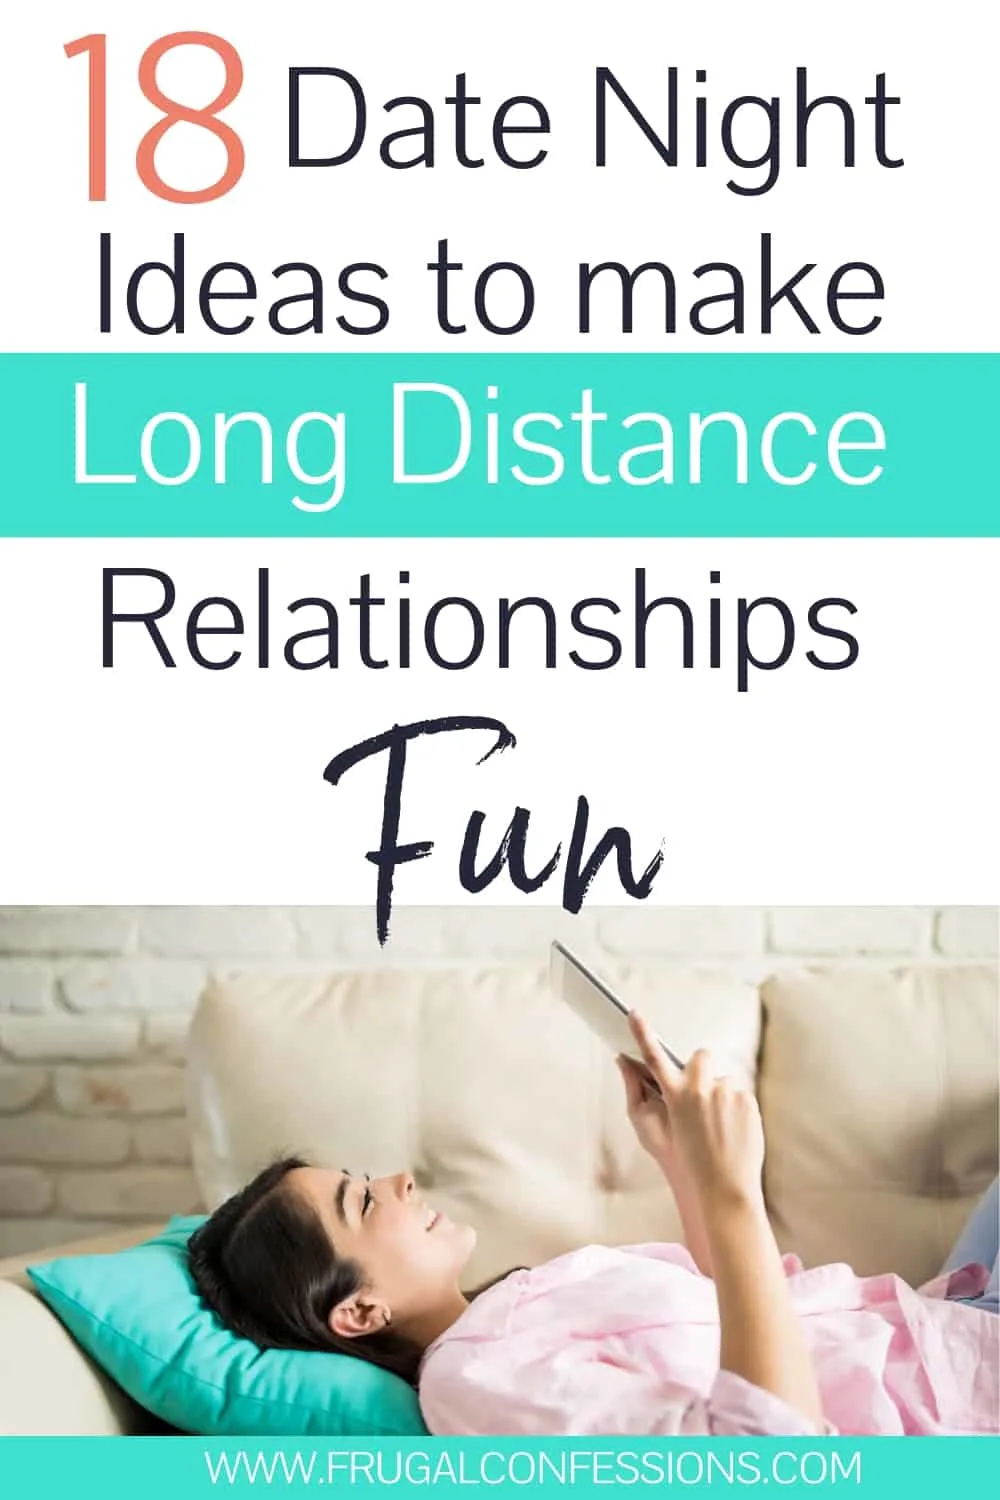 Does ldr really work?